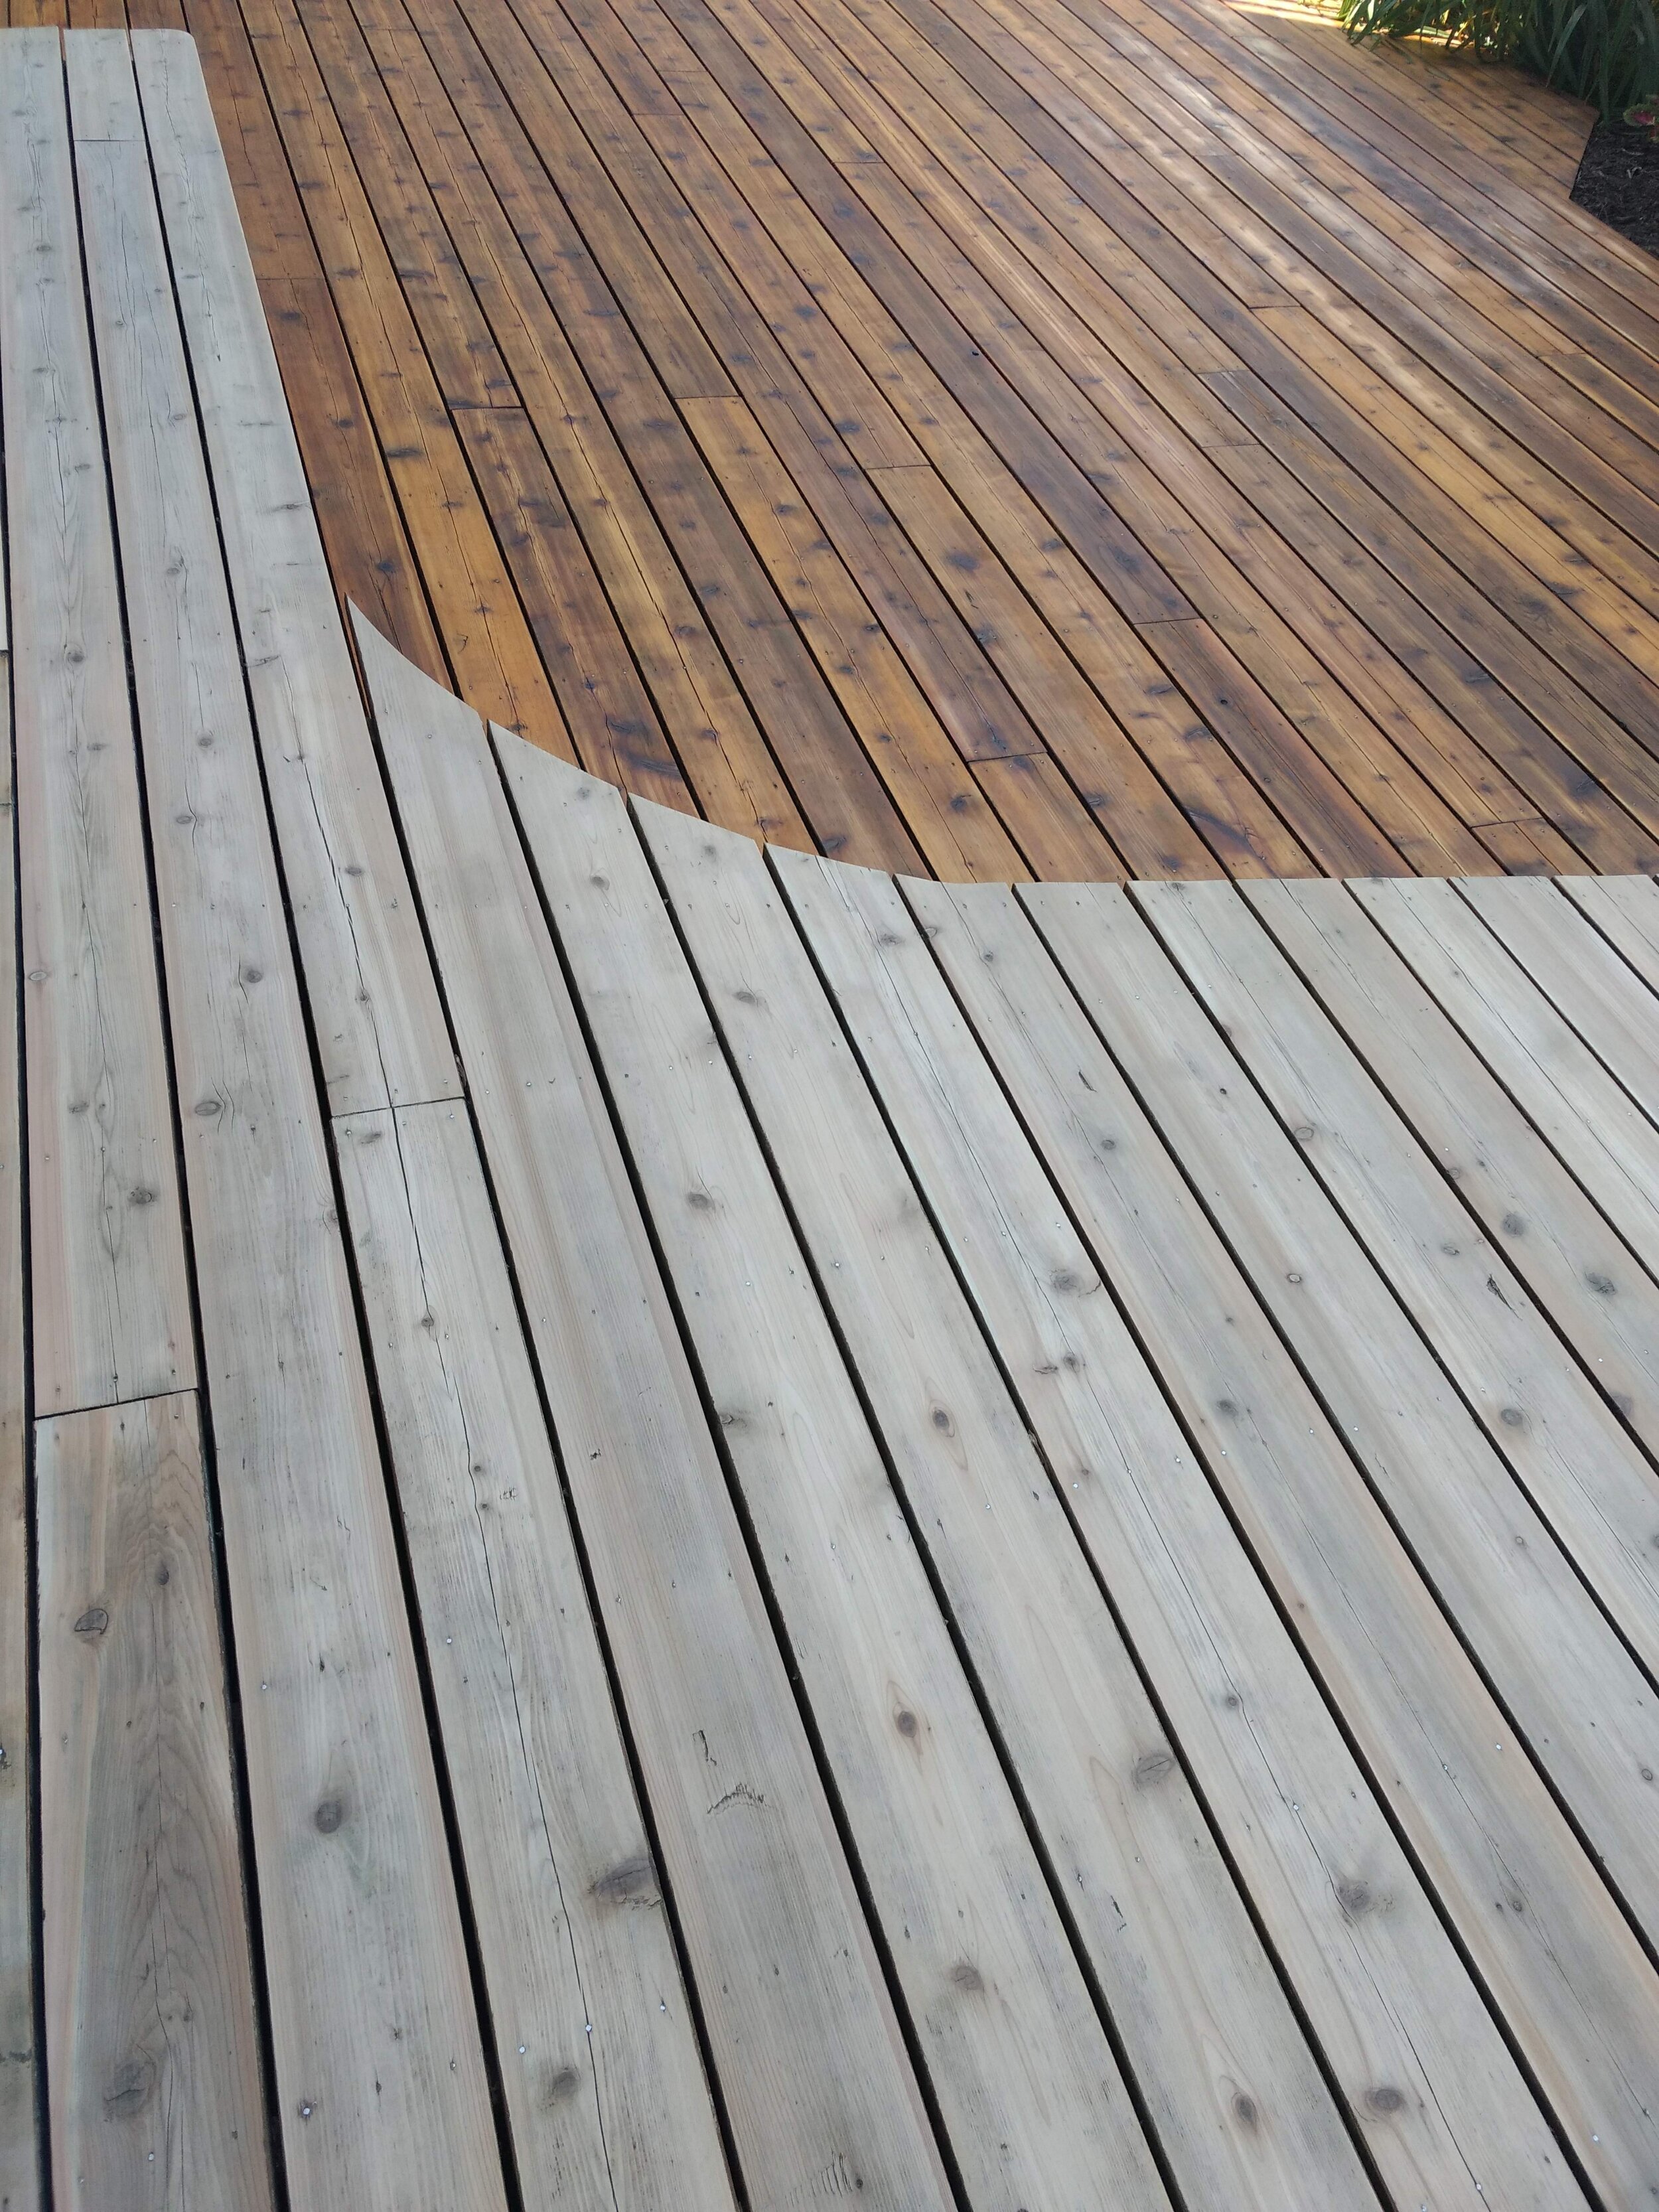 How To Stain A Cedar Wood Deck Perfectly - xoxo Rebecca